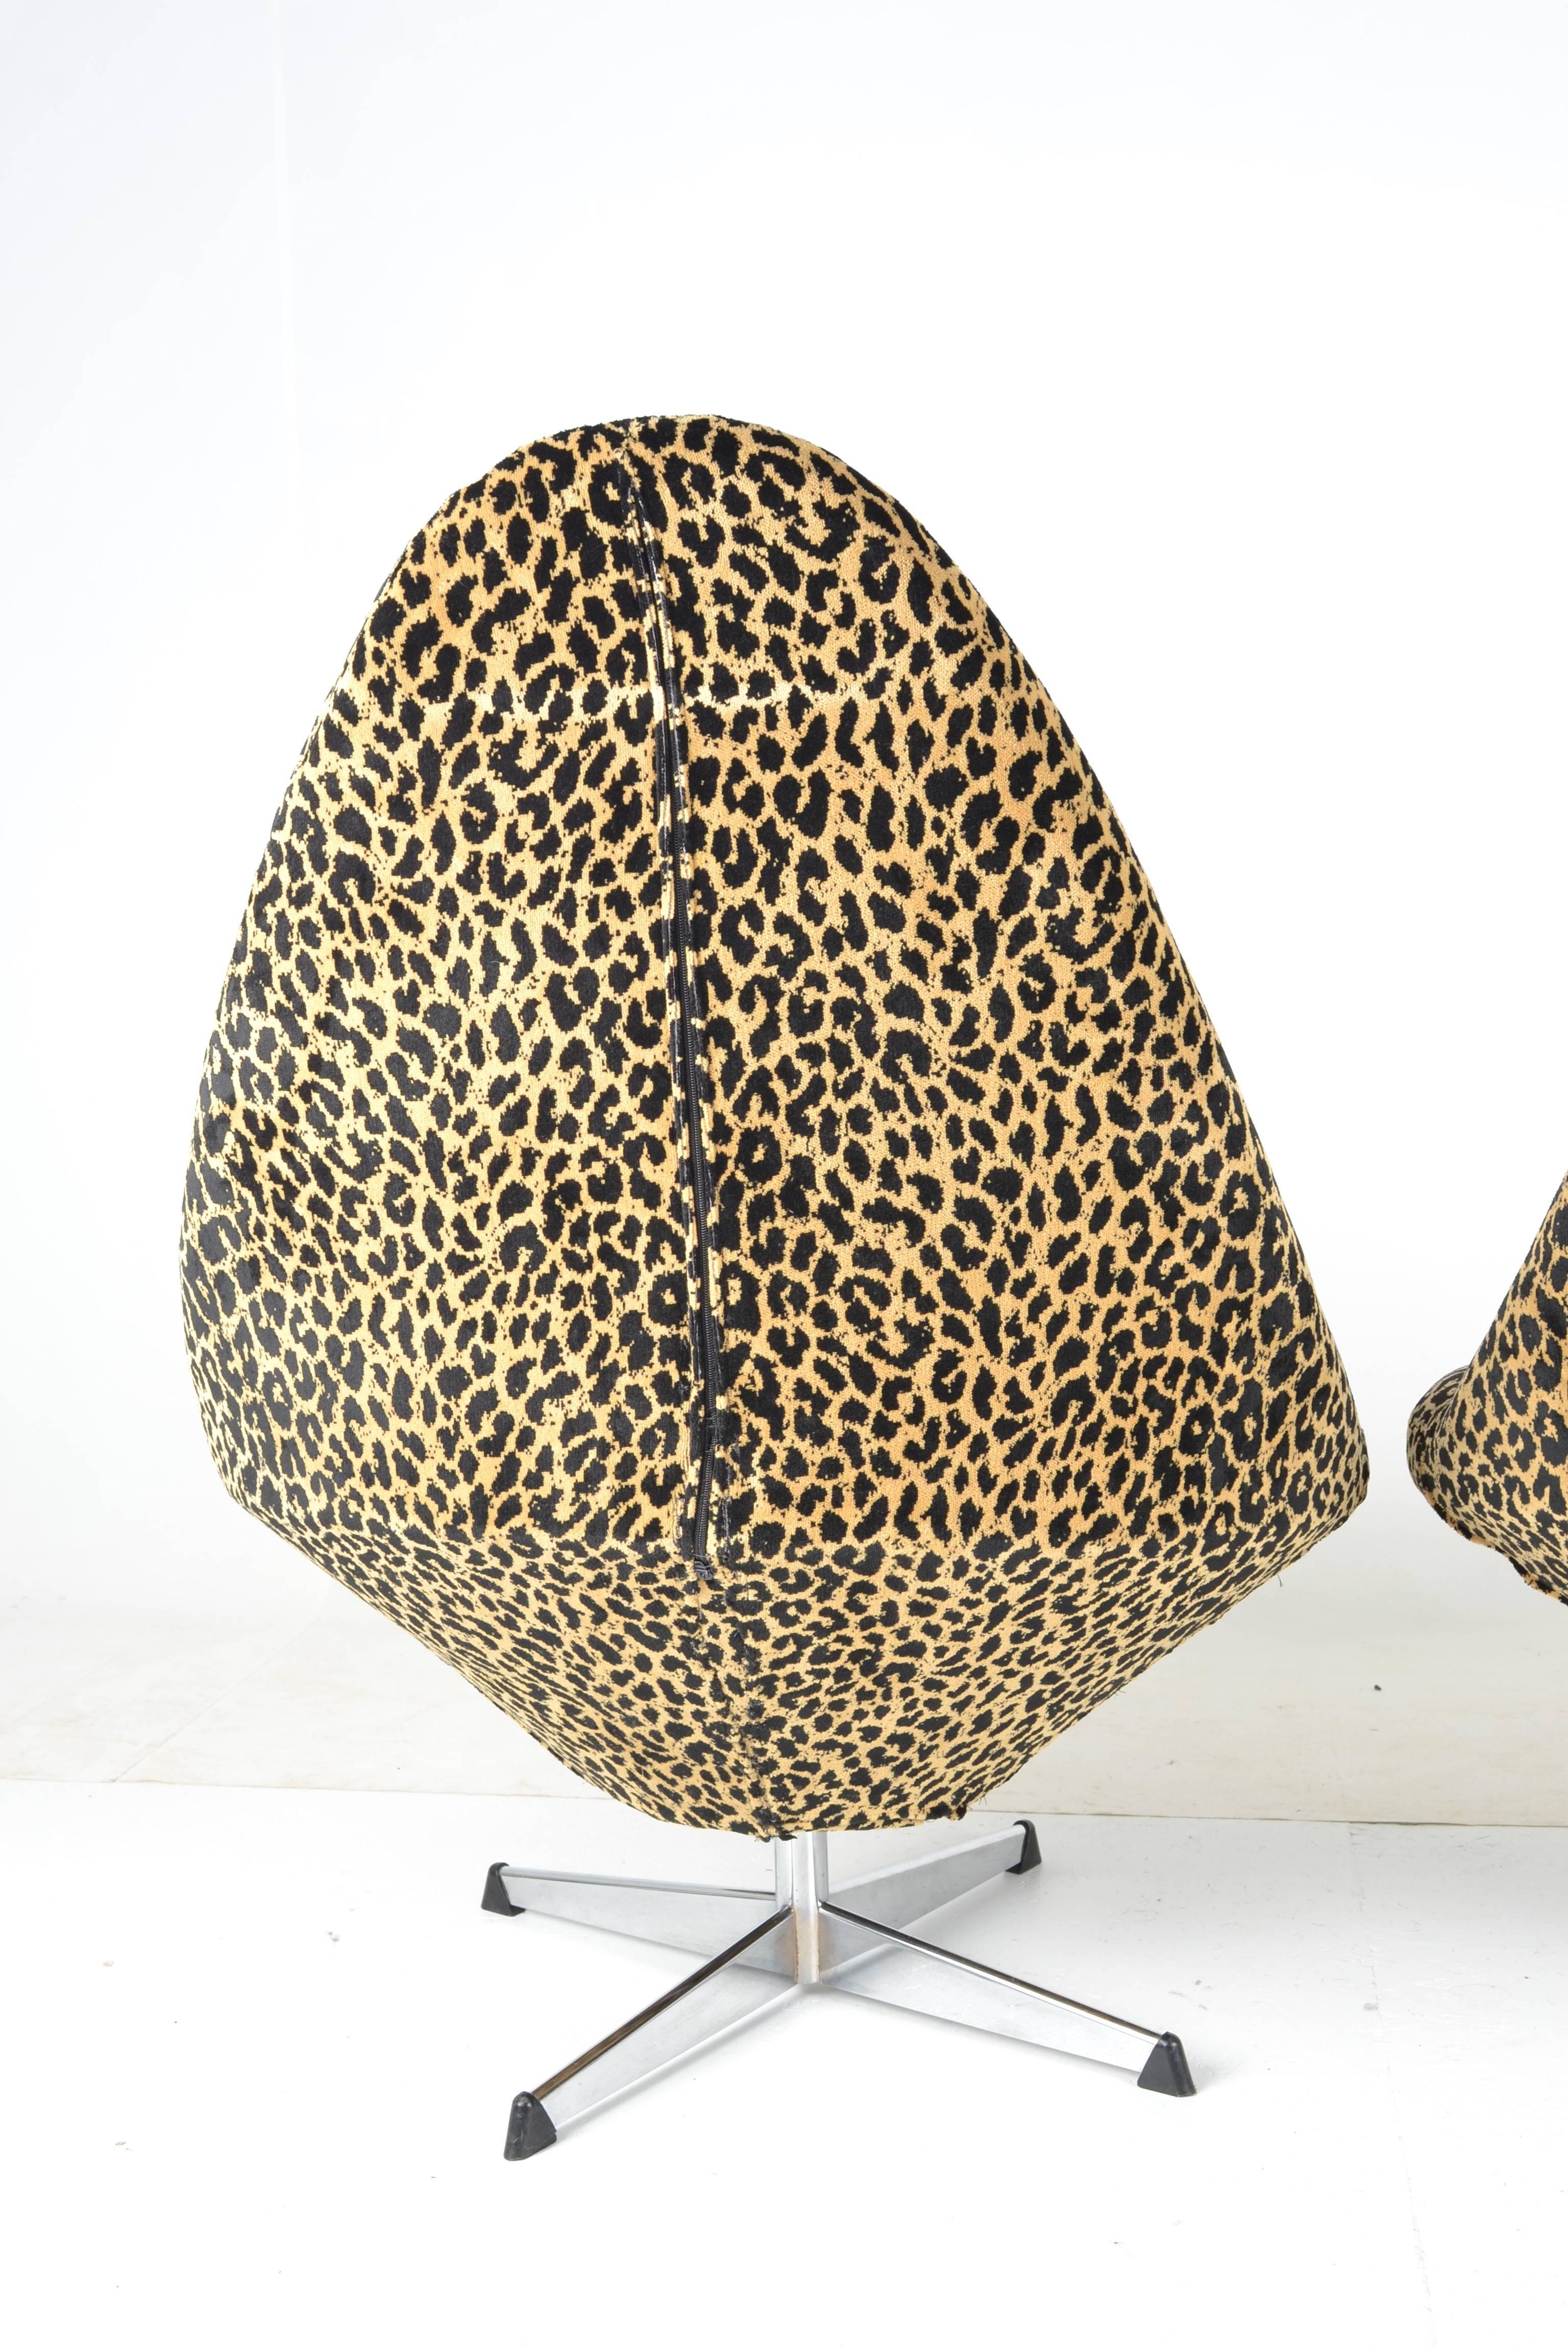 Mid-20th Century Pair of 1960s Swivel Chairs in Leopard